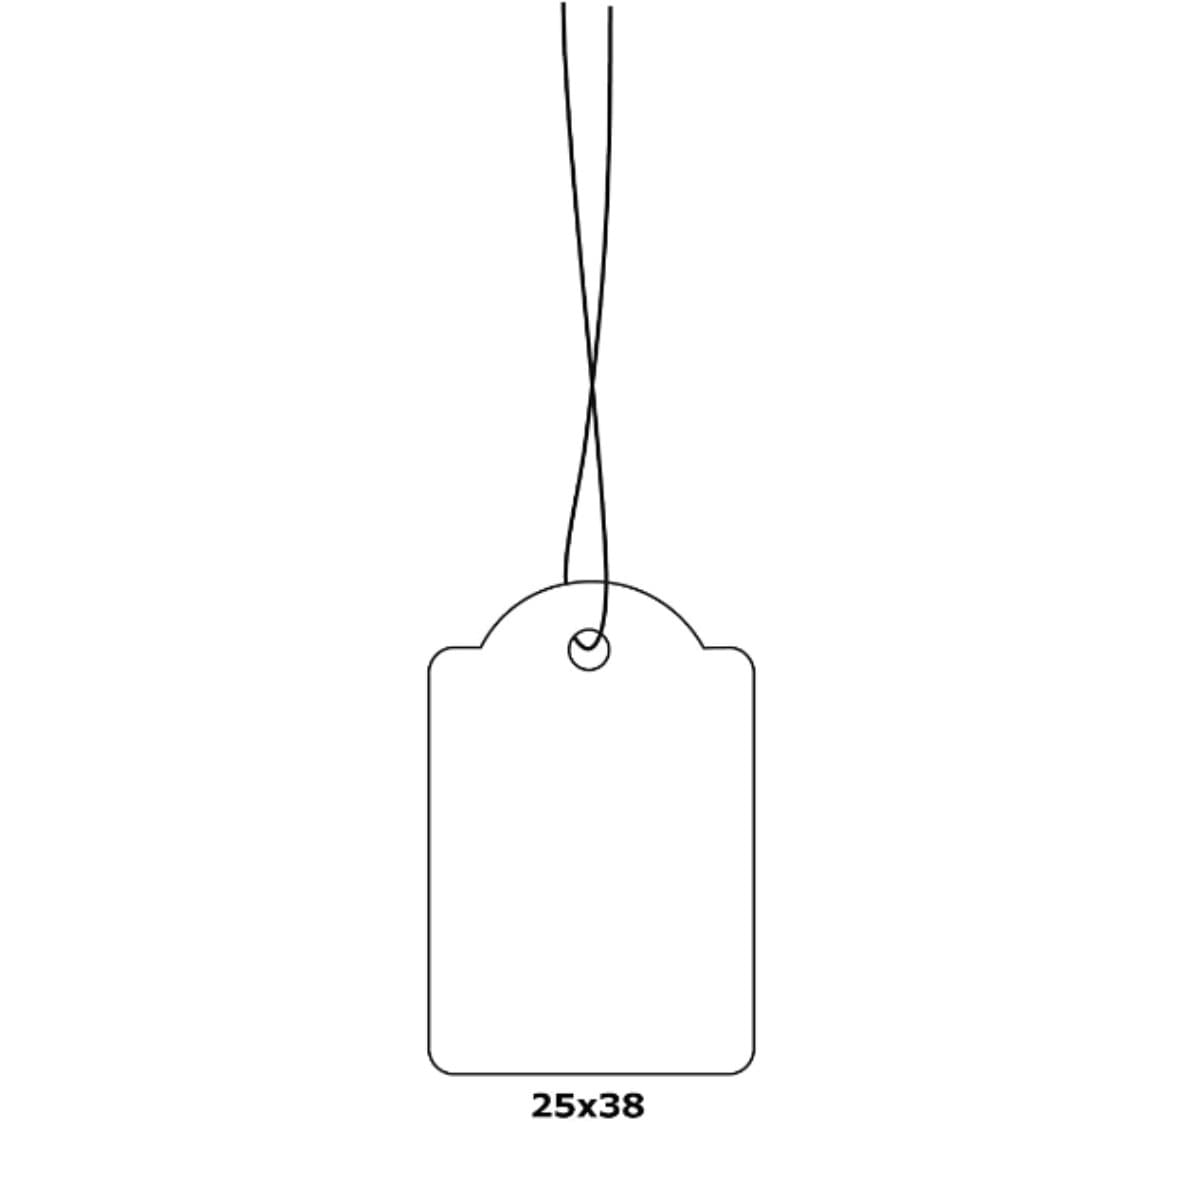 Herma Merchandise Tags with String, 25 x 38 mm, White